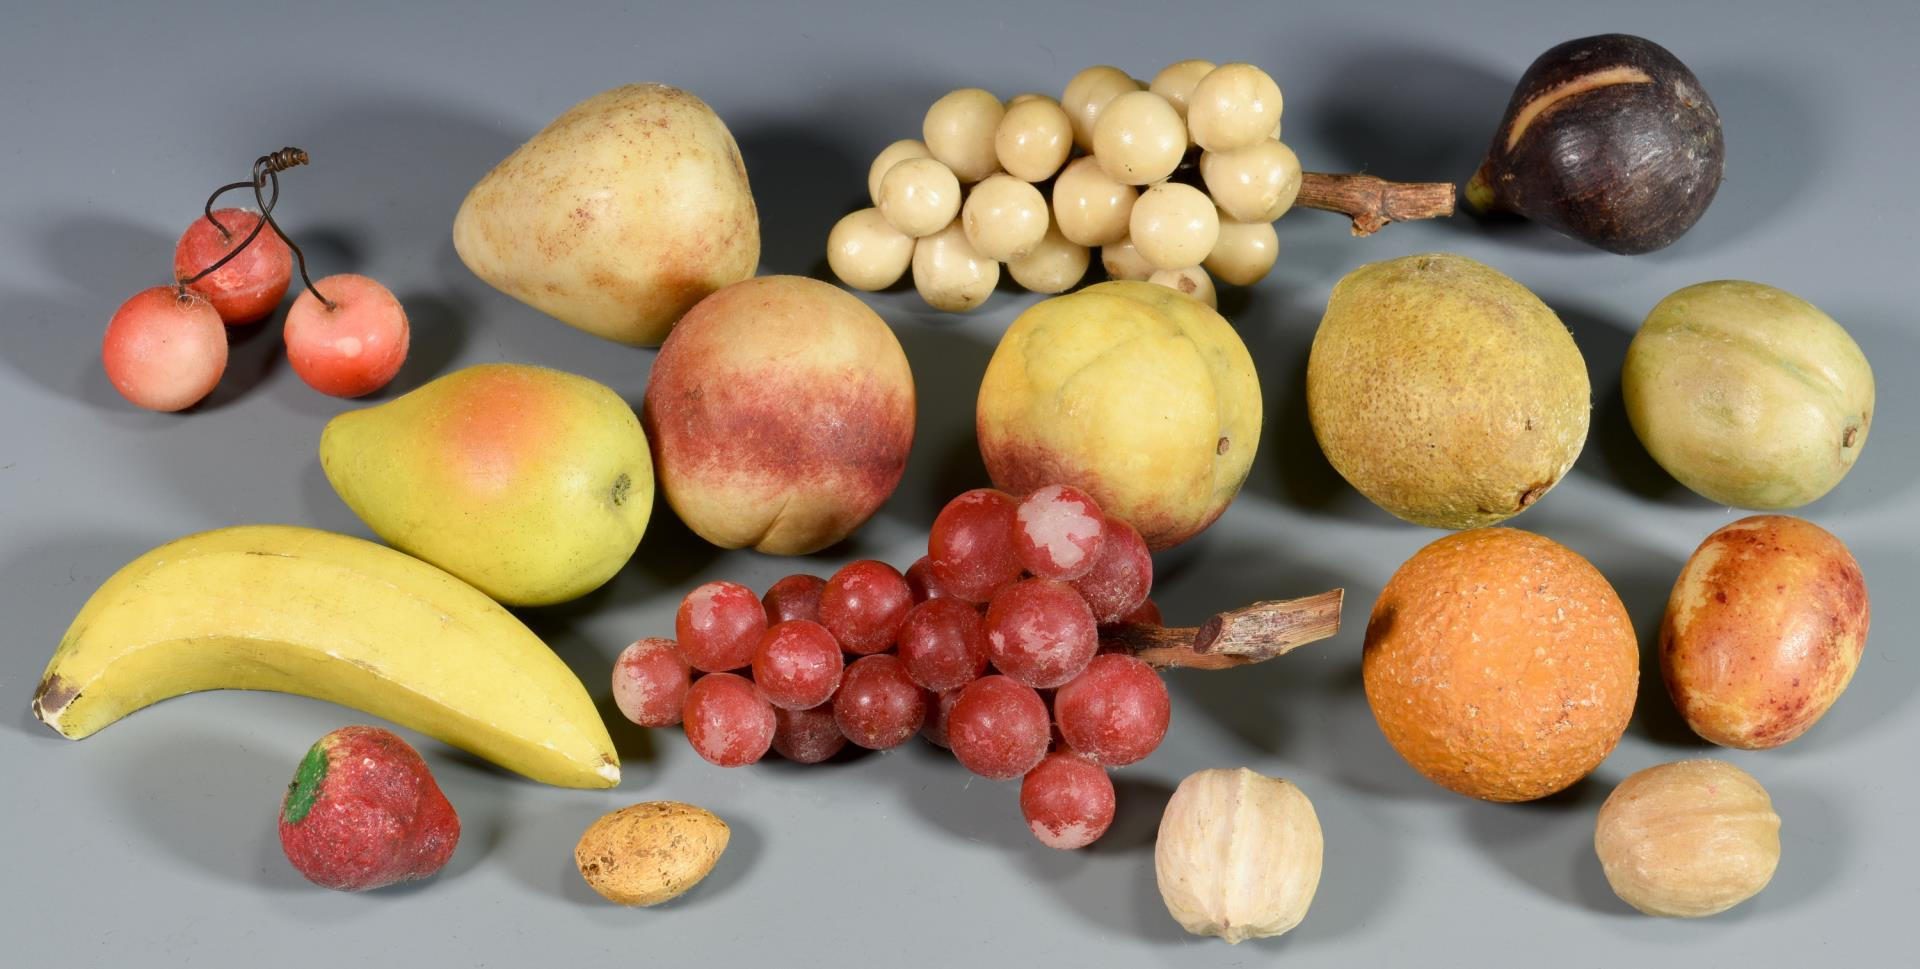 Lot 639: Carved Stone Fruit with bowl